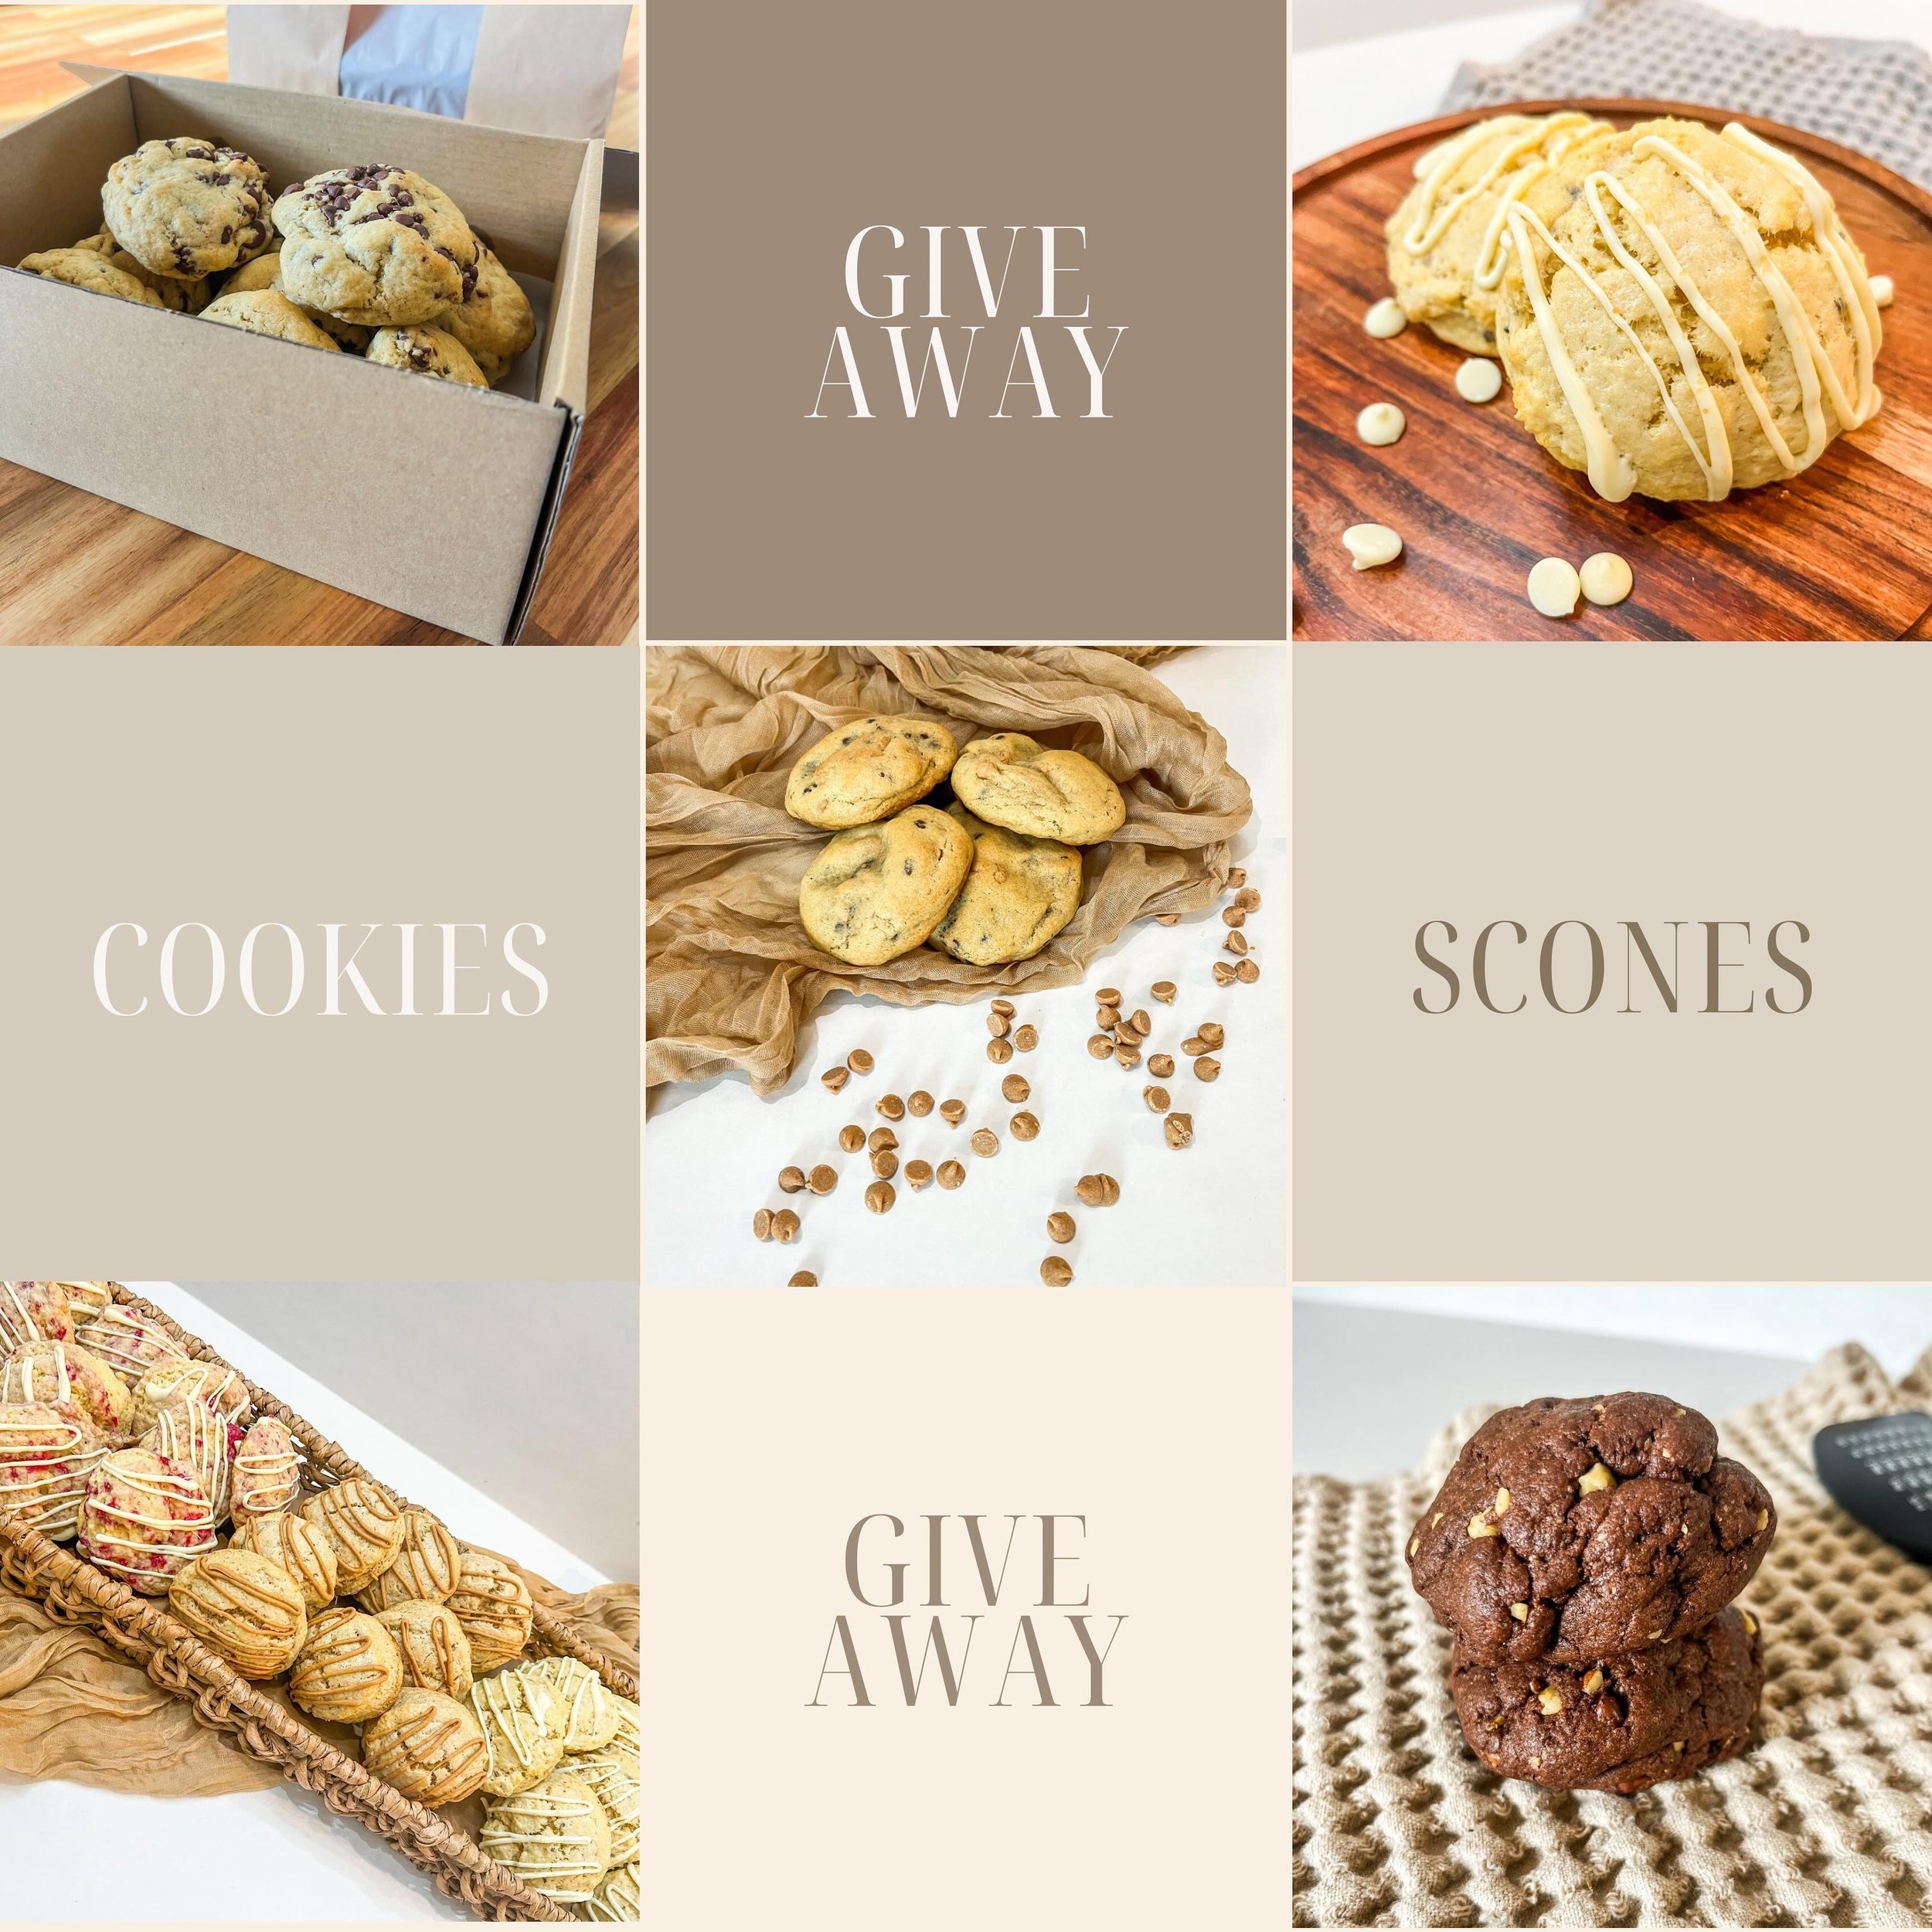 🤍🌸GIVEAWAY-GIVEAWAY-GIVEAWAY🌸🤍
.
Want to win 1 dozen cookies and 8 scones?! 
.
-like this post
-share on your story
-follow traditional treats 
.
Follow these simple steps for your chance to win 1 dozen cookies of your choice and 8 scones of your